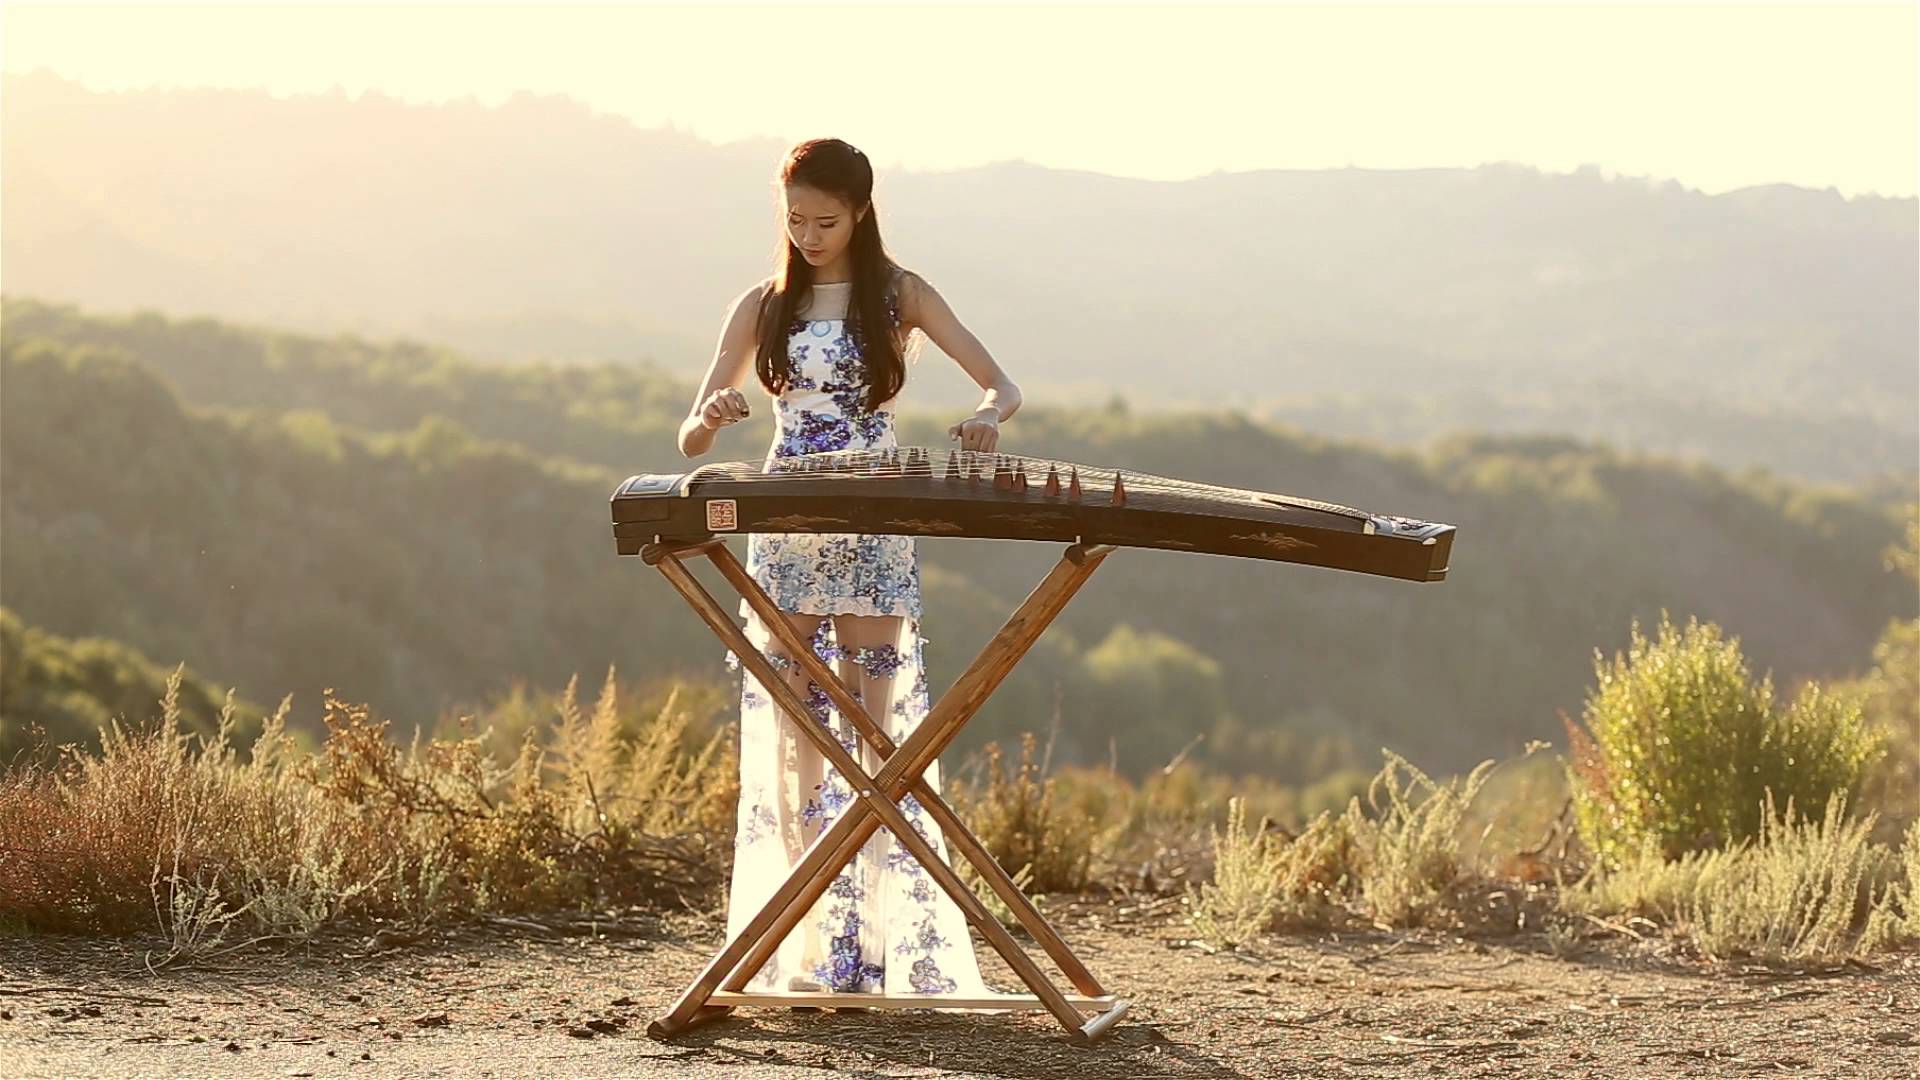 See You Again Zither Guzheng Cover 古筝 , HD Wallpaper & Backgrounds